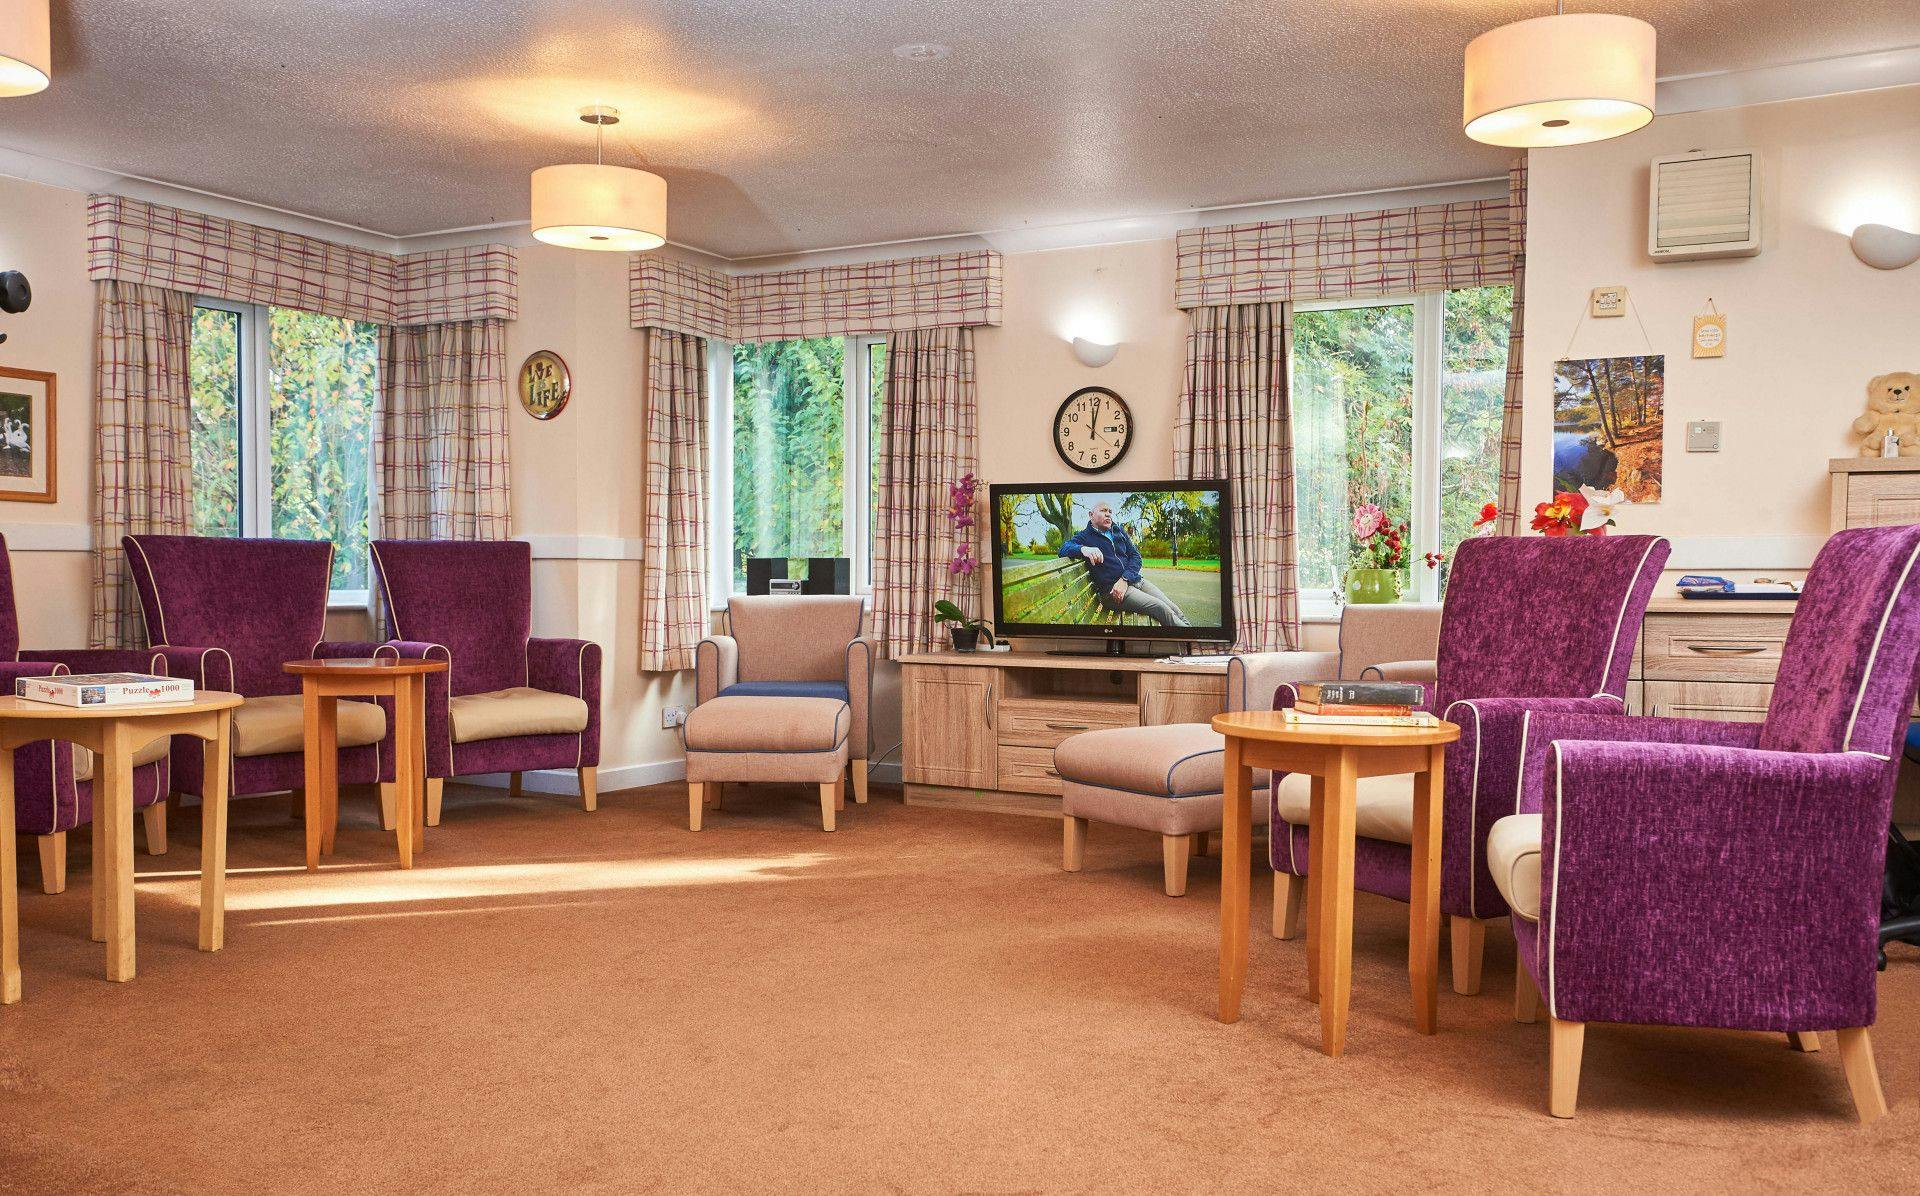  Ogilvy Court care home in wembley 1